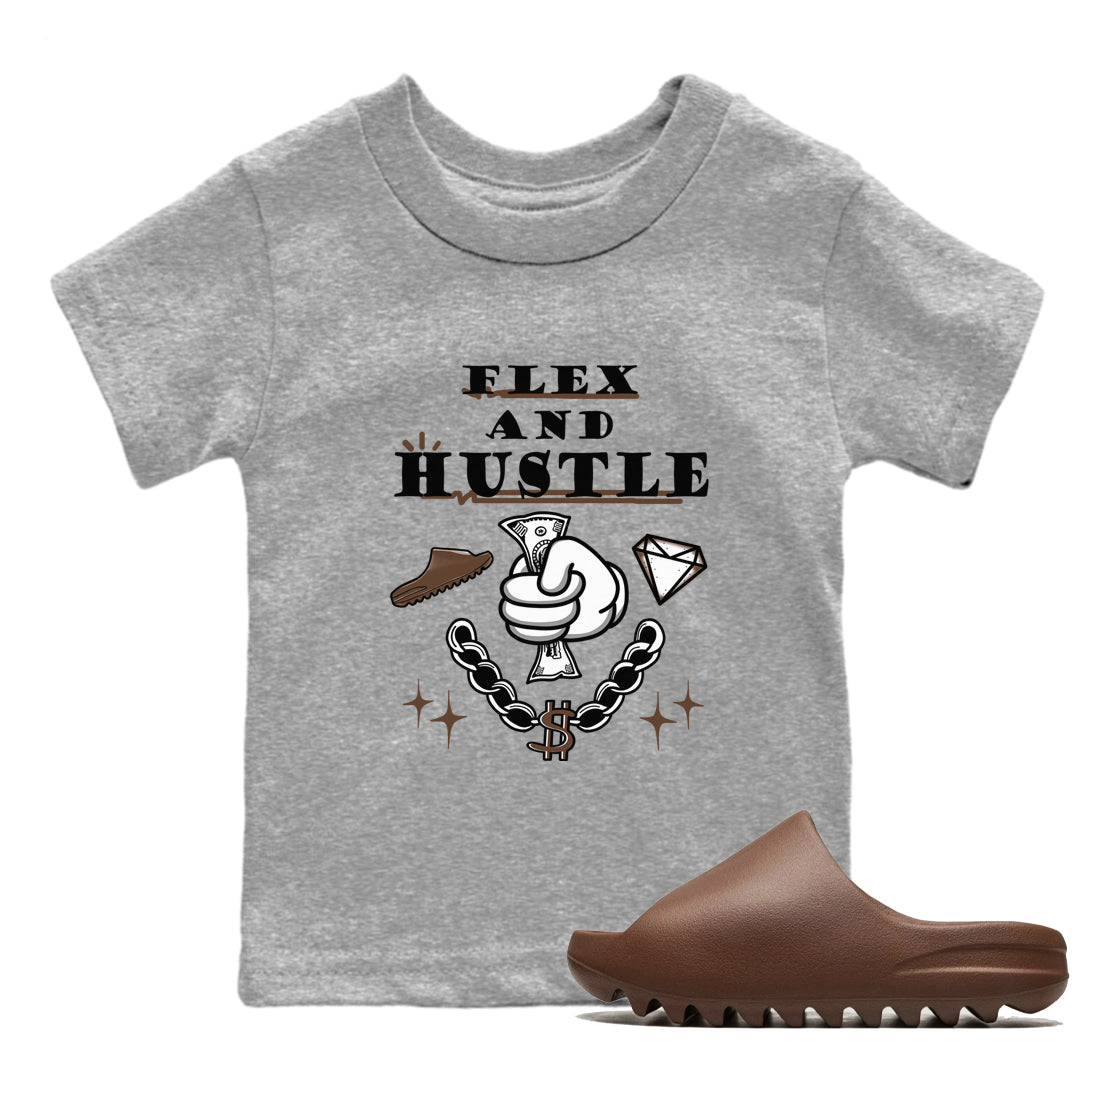 Yeezy Slide Flax shirts to match jordans Flex And Hustle sneaker match tees Yeezy Slide Flax SNRT Sneaker Tees streetwear brand Baby and Youth Heather Grey 1 cotton tee